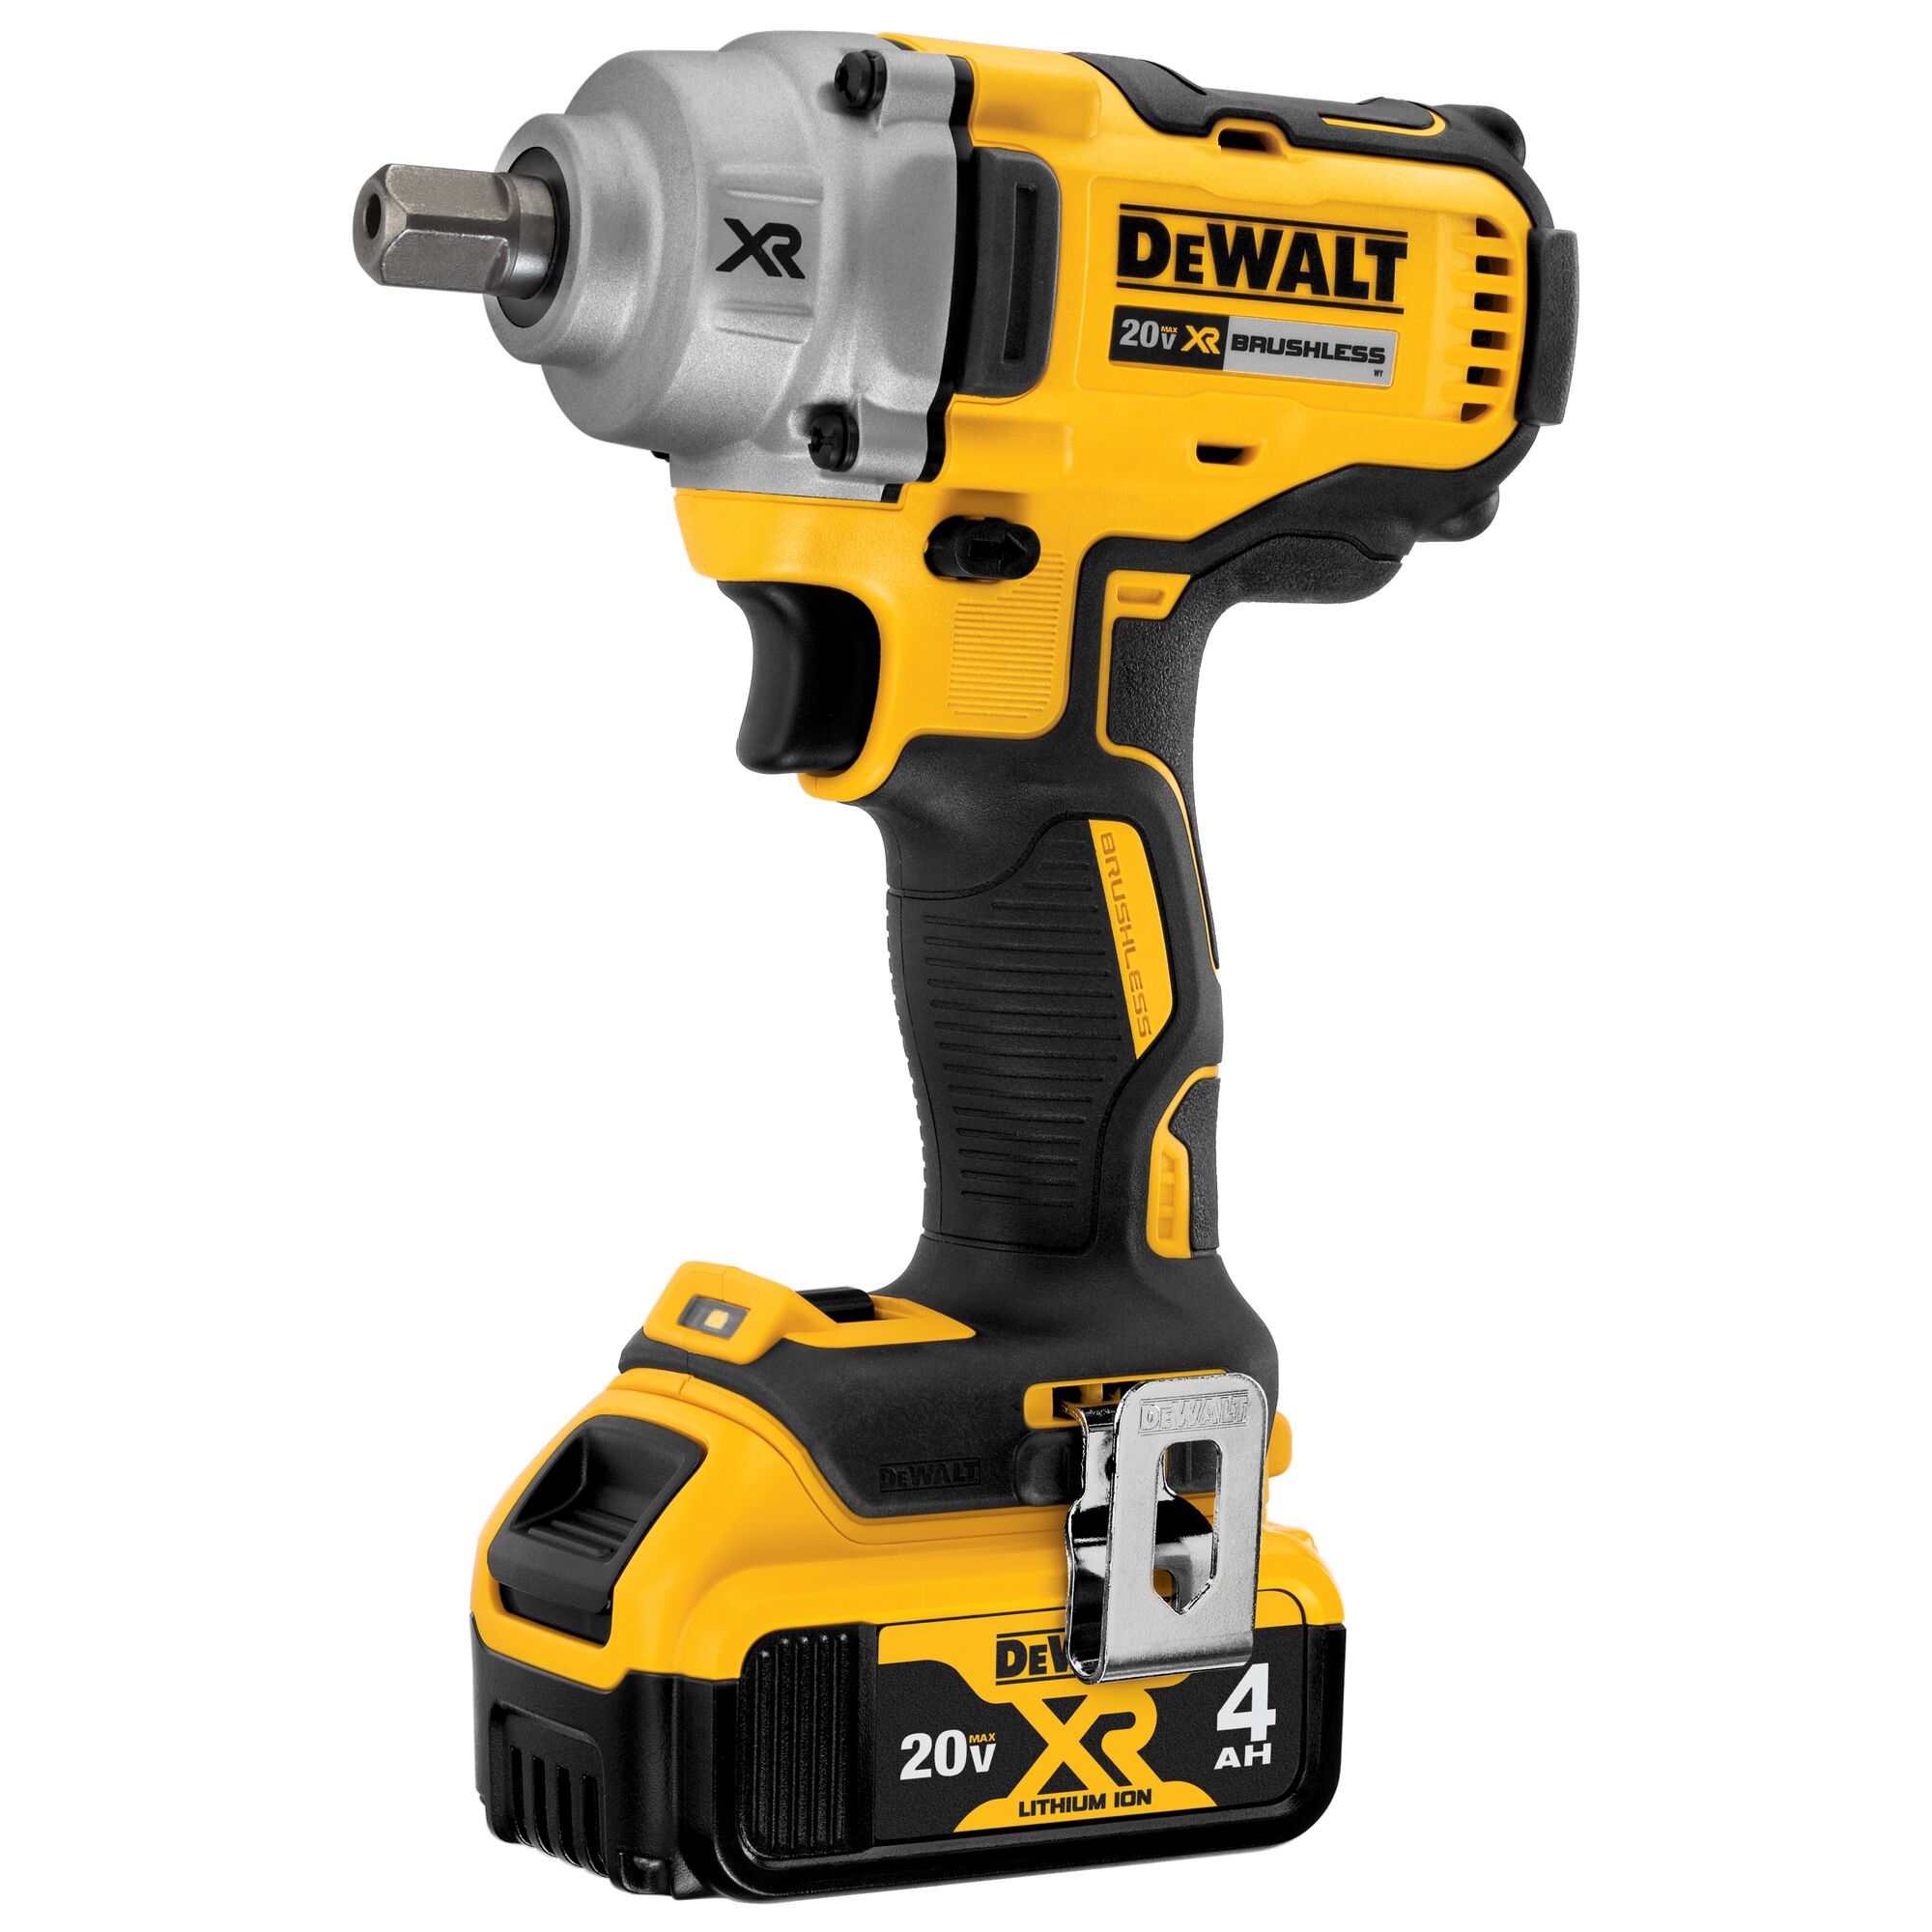 DEWALT Xr 20-volt Max Variable Speed Brushless 1/2-in Drive Cordless Impact Wrench (1-Battery Included) Lowes.com - $90 - YMMV